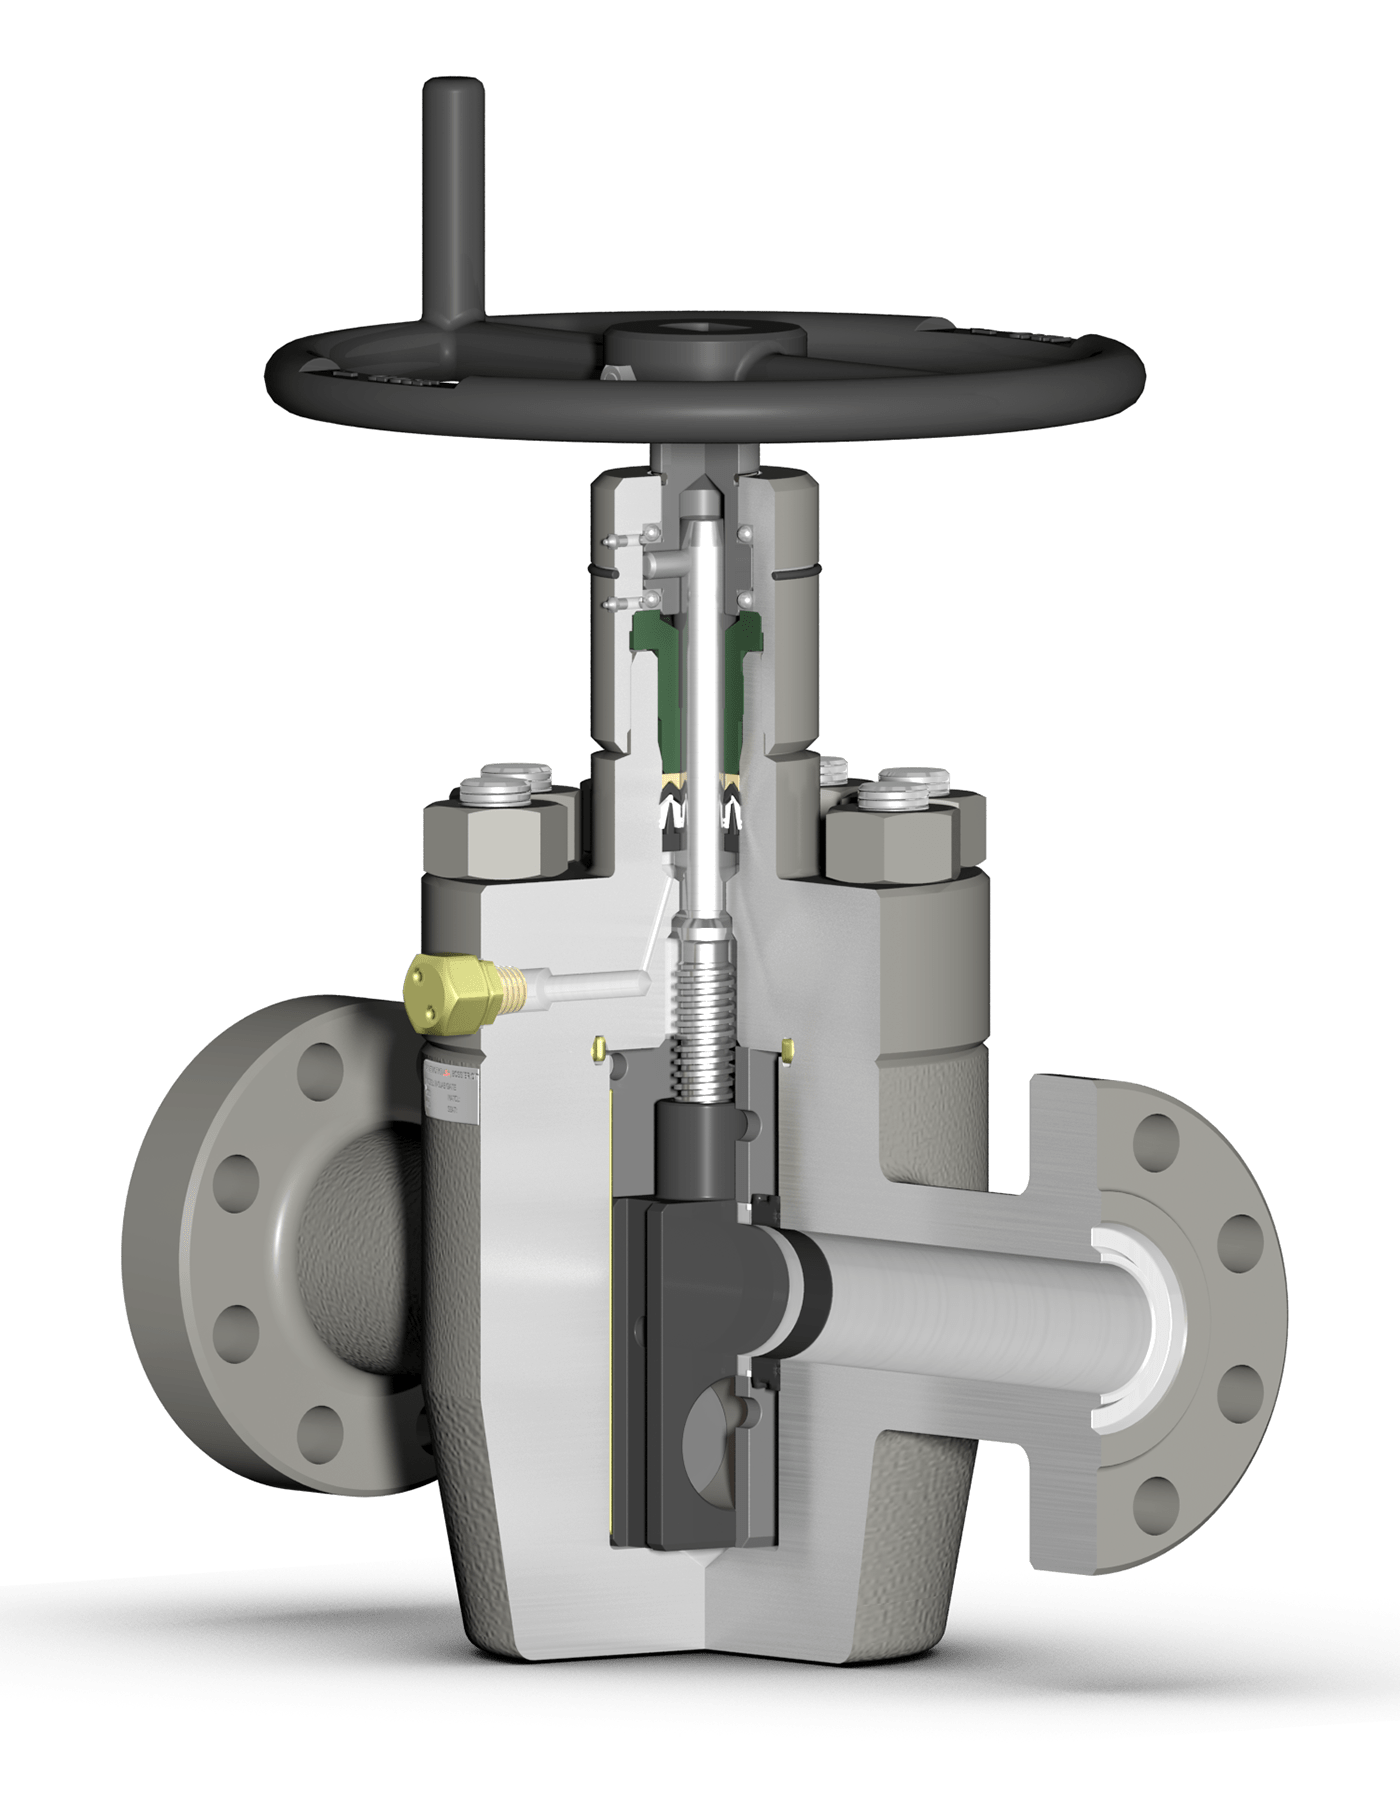 The Valveworks USA Gate Valve series consists of a lineup of gate valves wi...